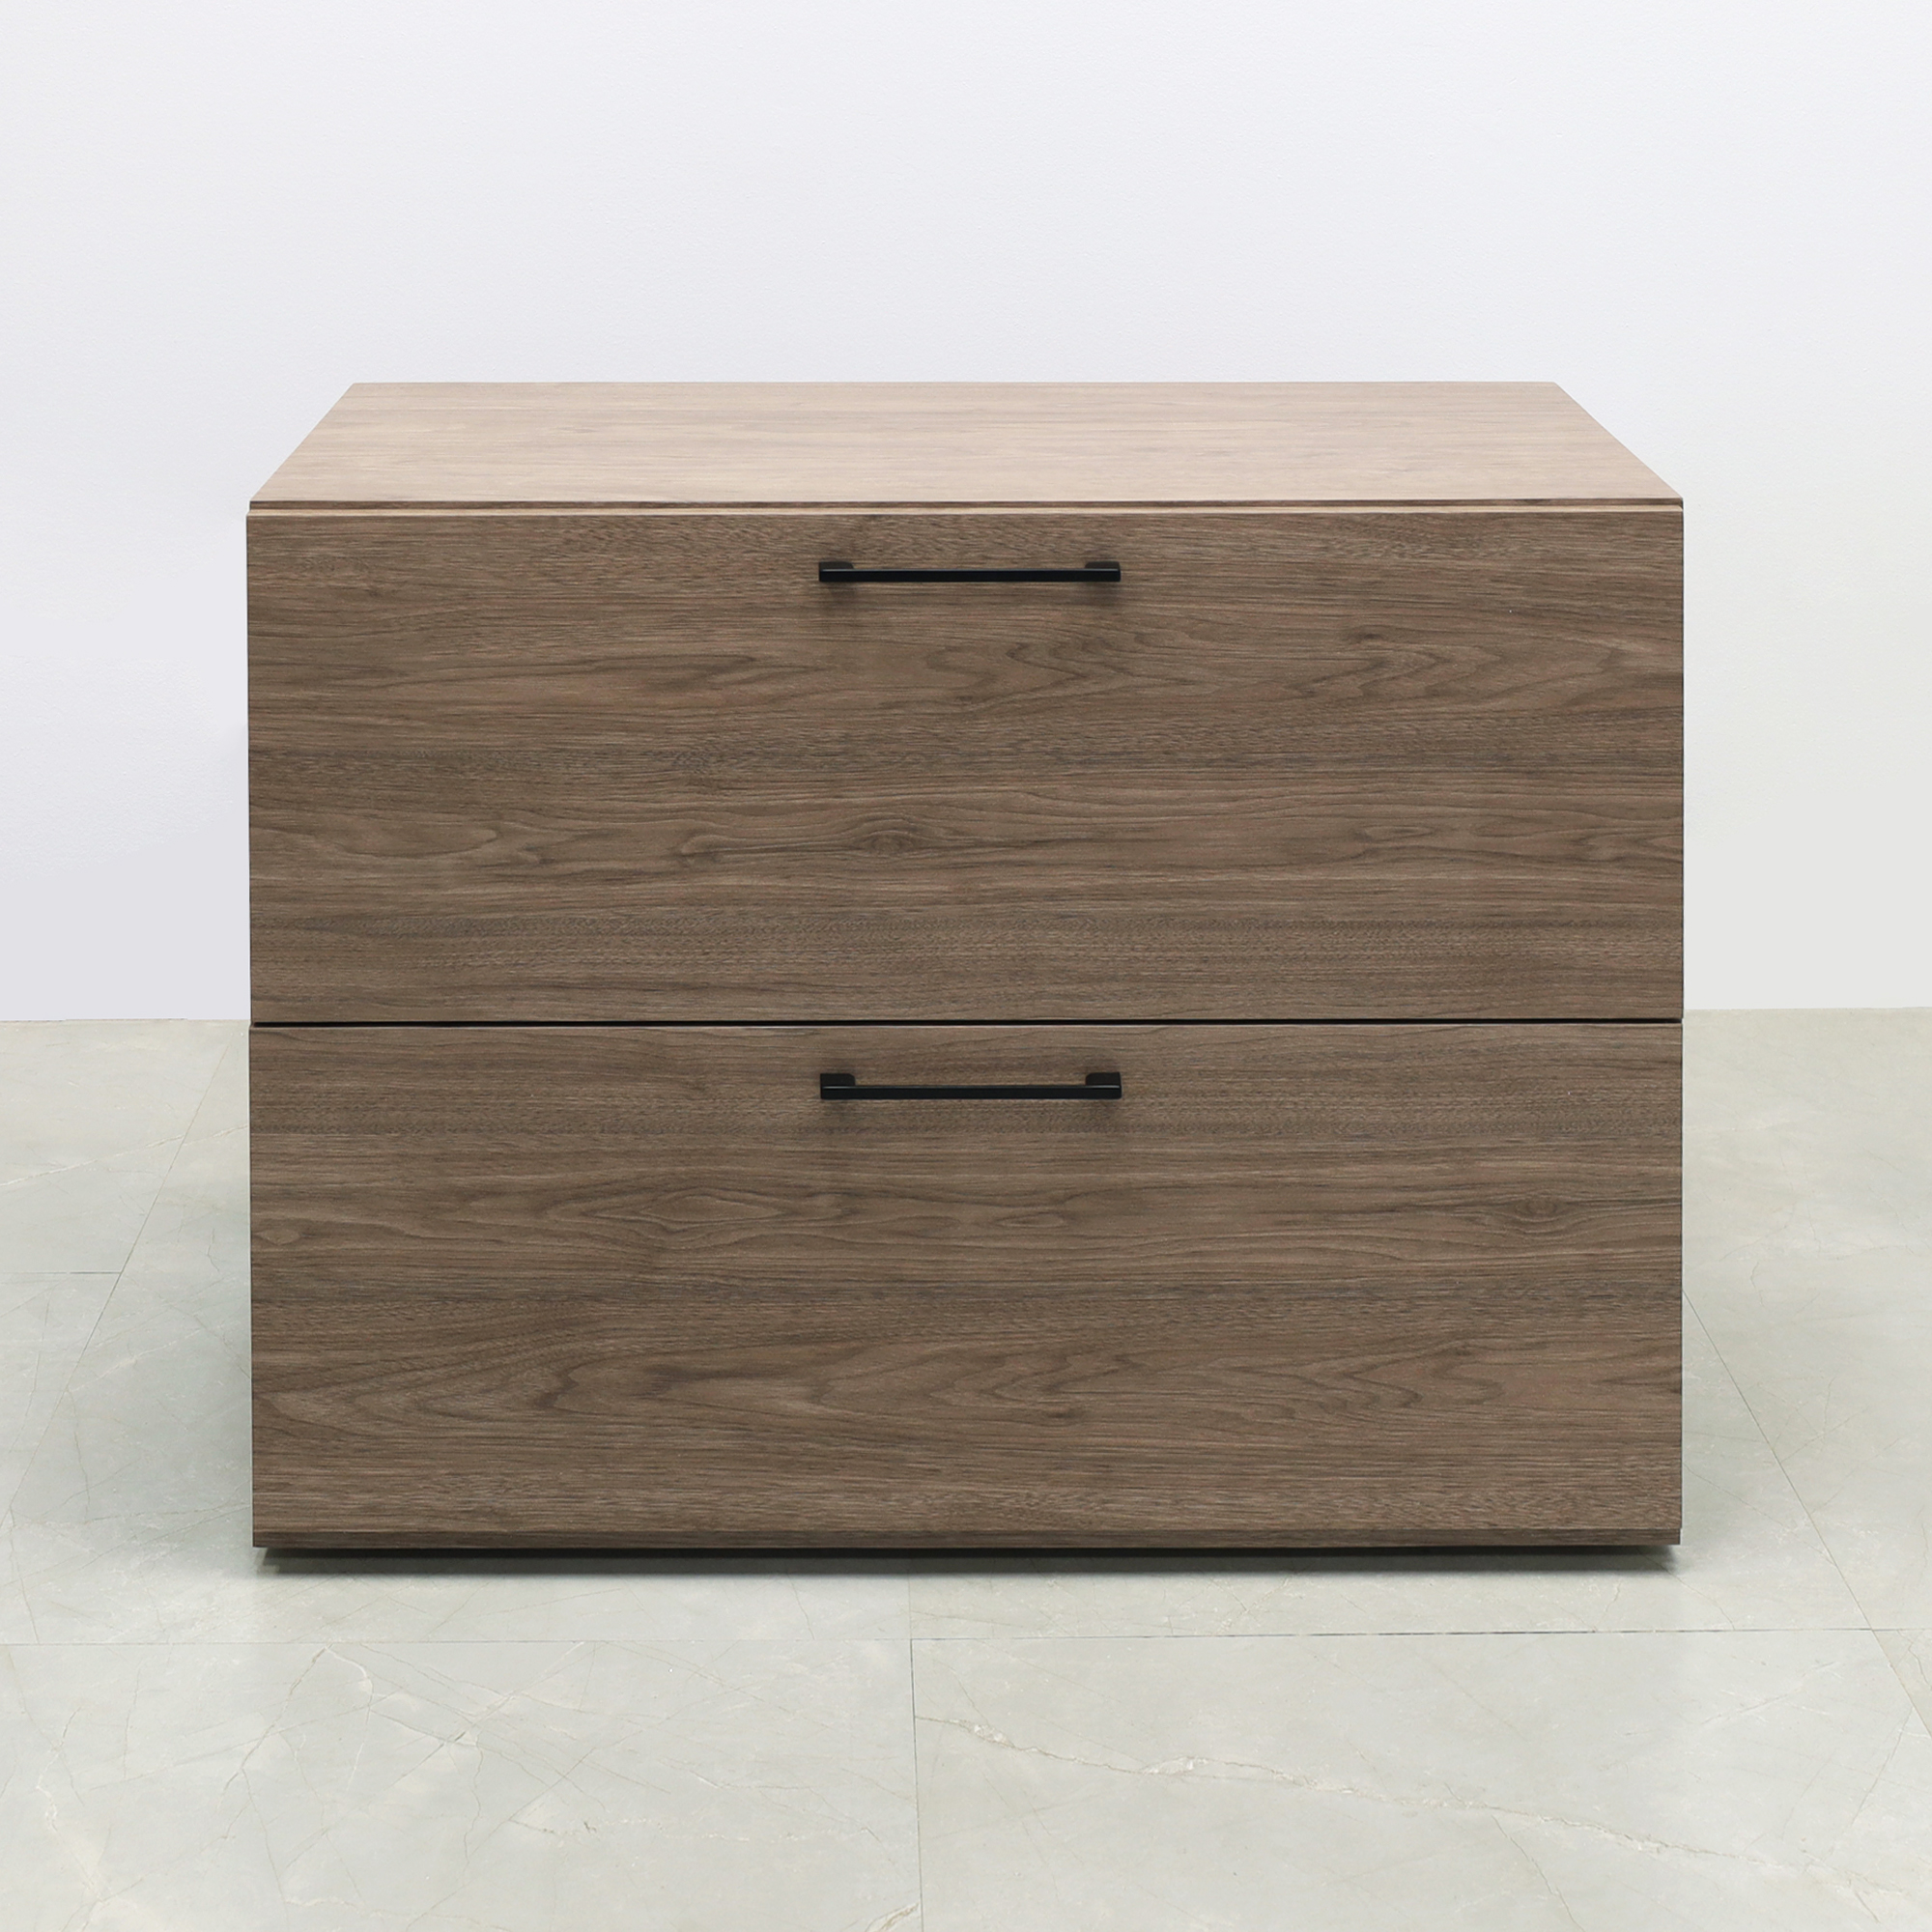 Naples Lateral File Cabinet in hazel walnut (discontinued) laminate, shown here.